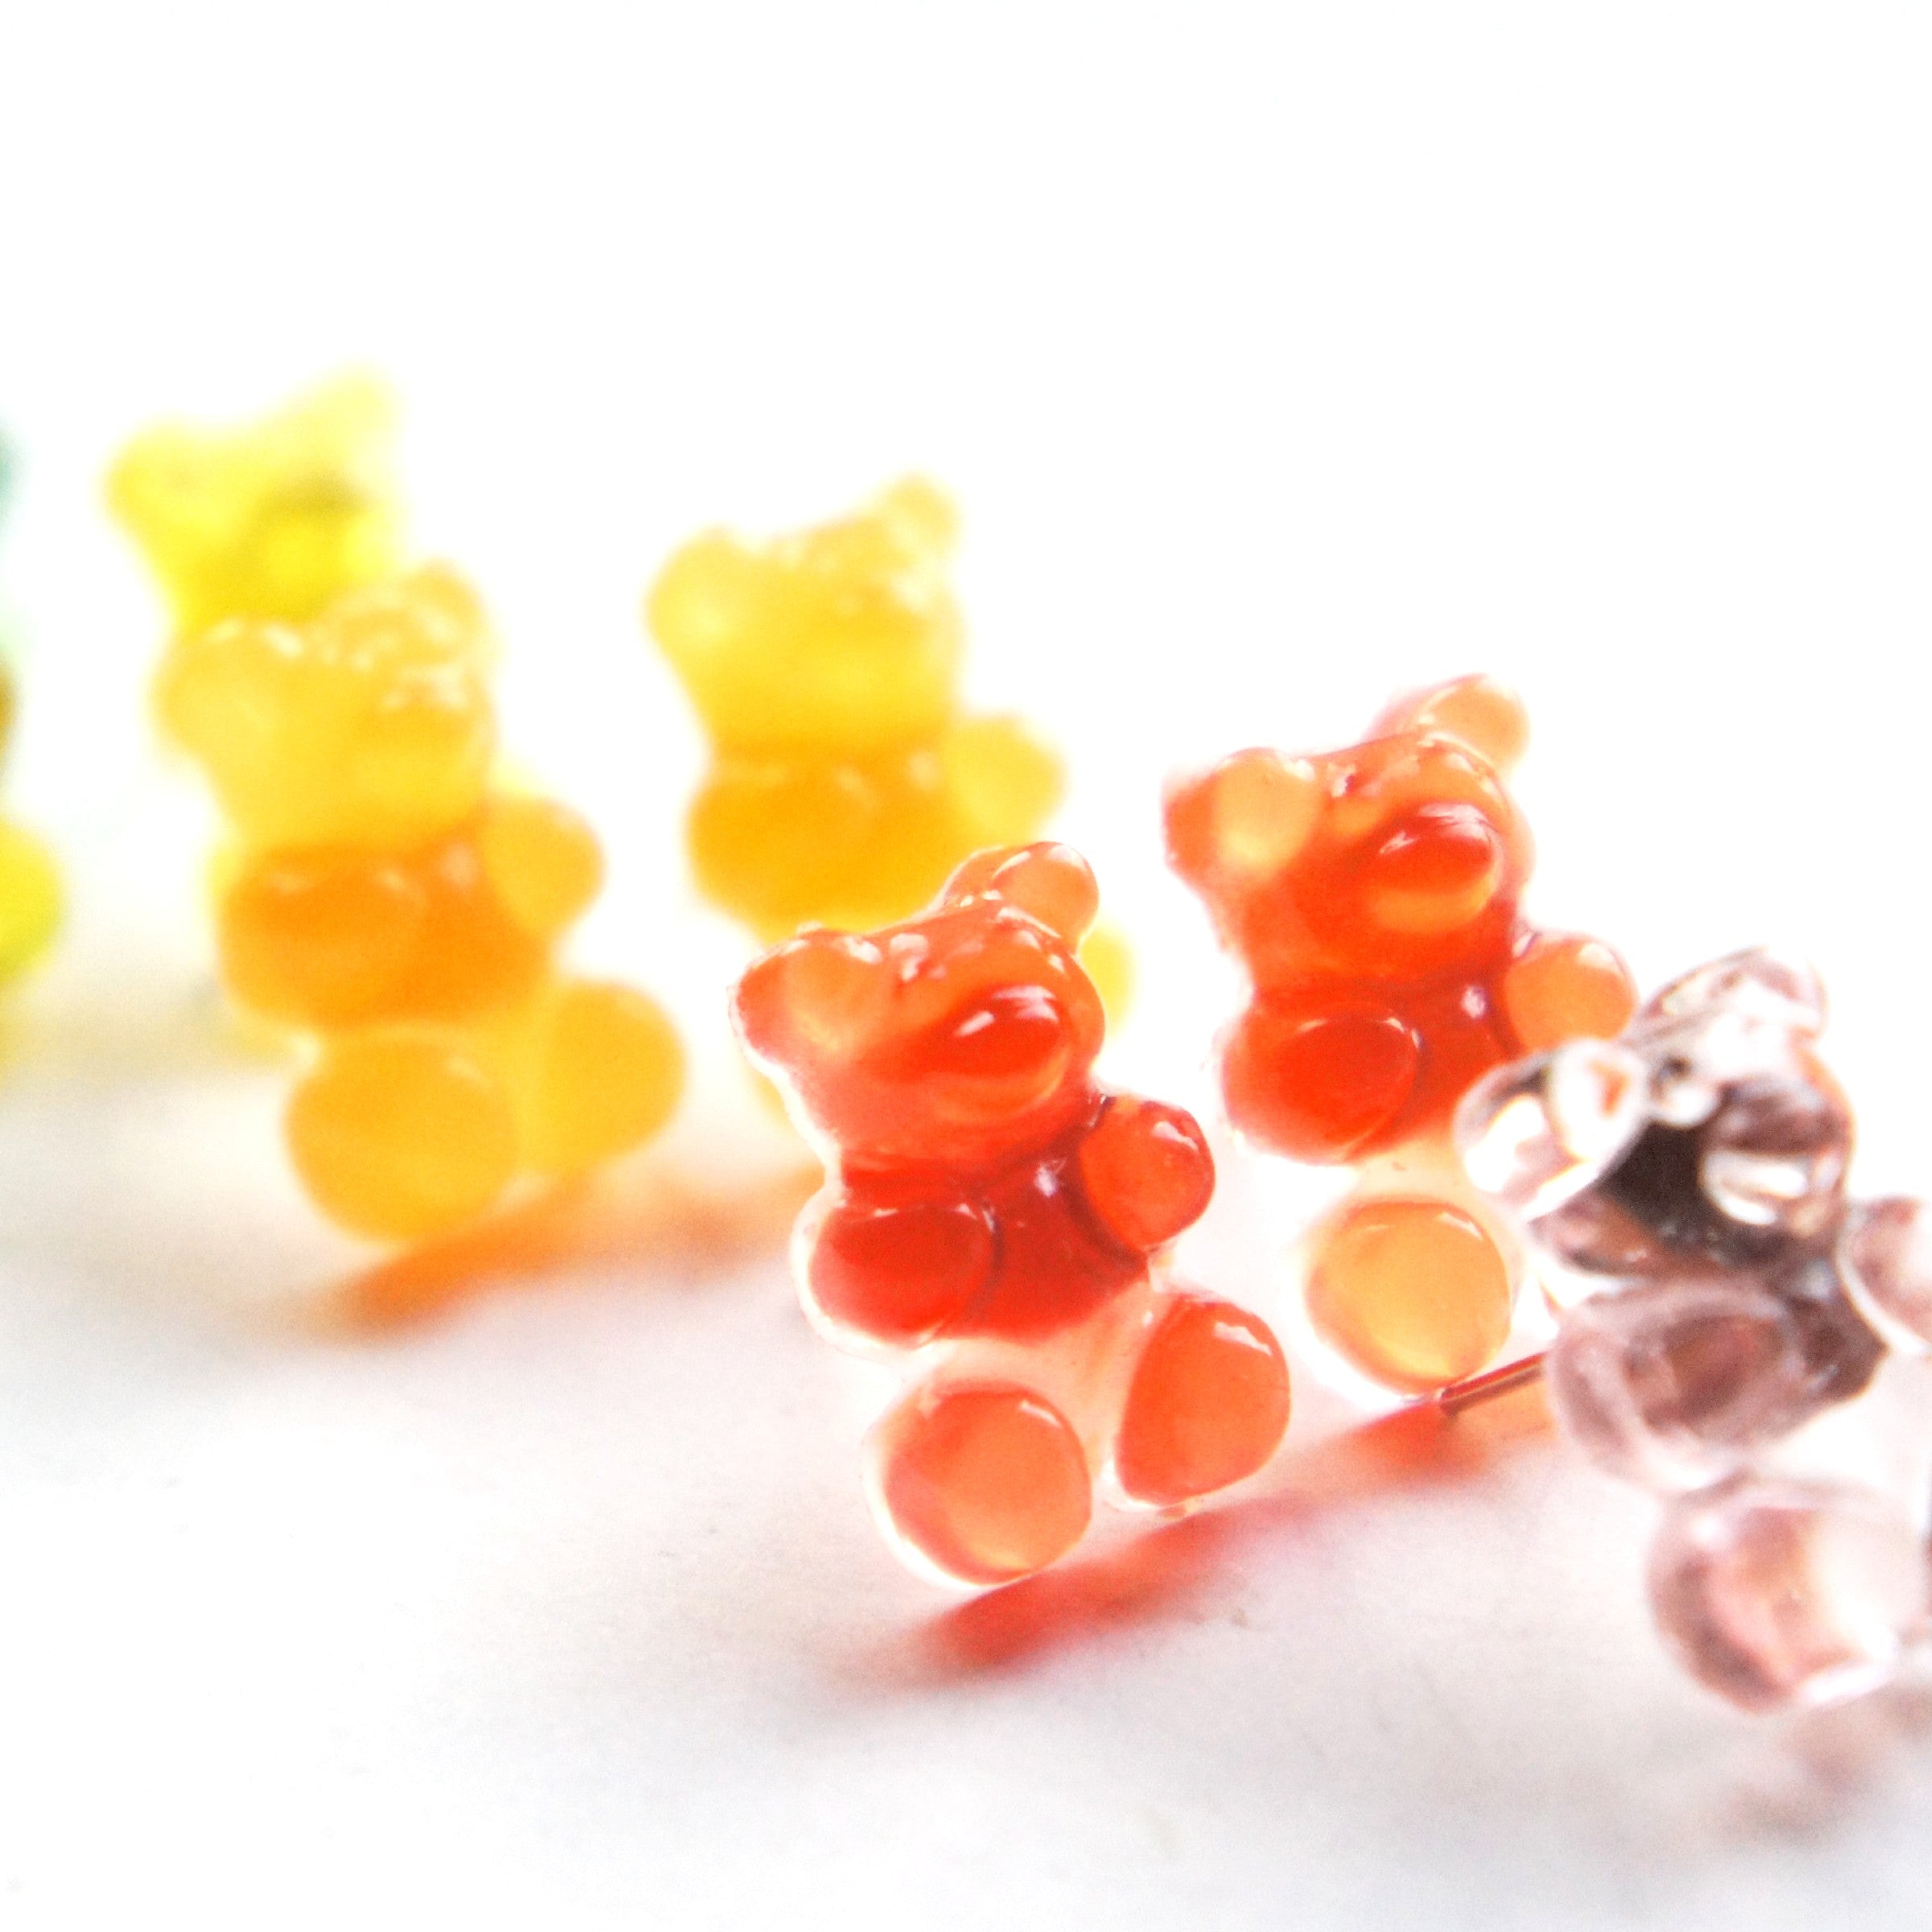 Gummy Bears Stud Earrings - Jillicious charms and accessories